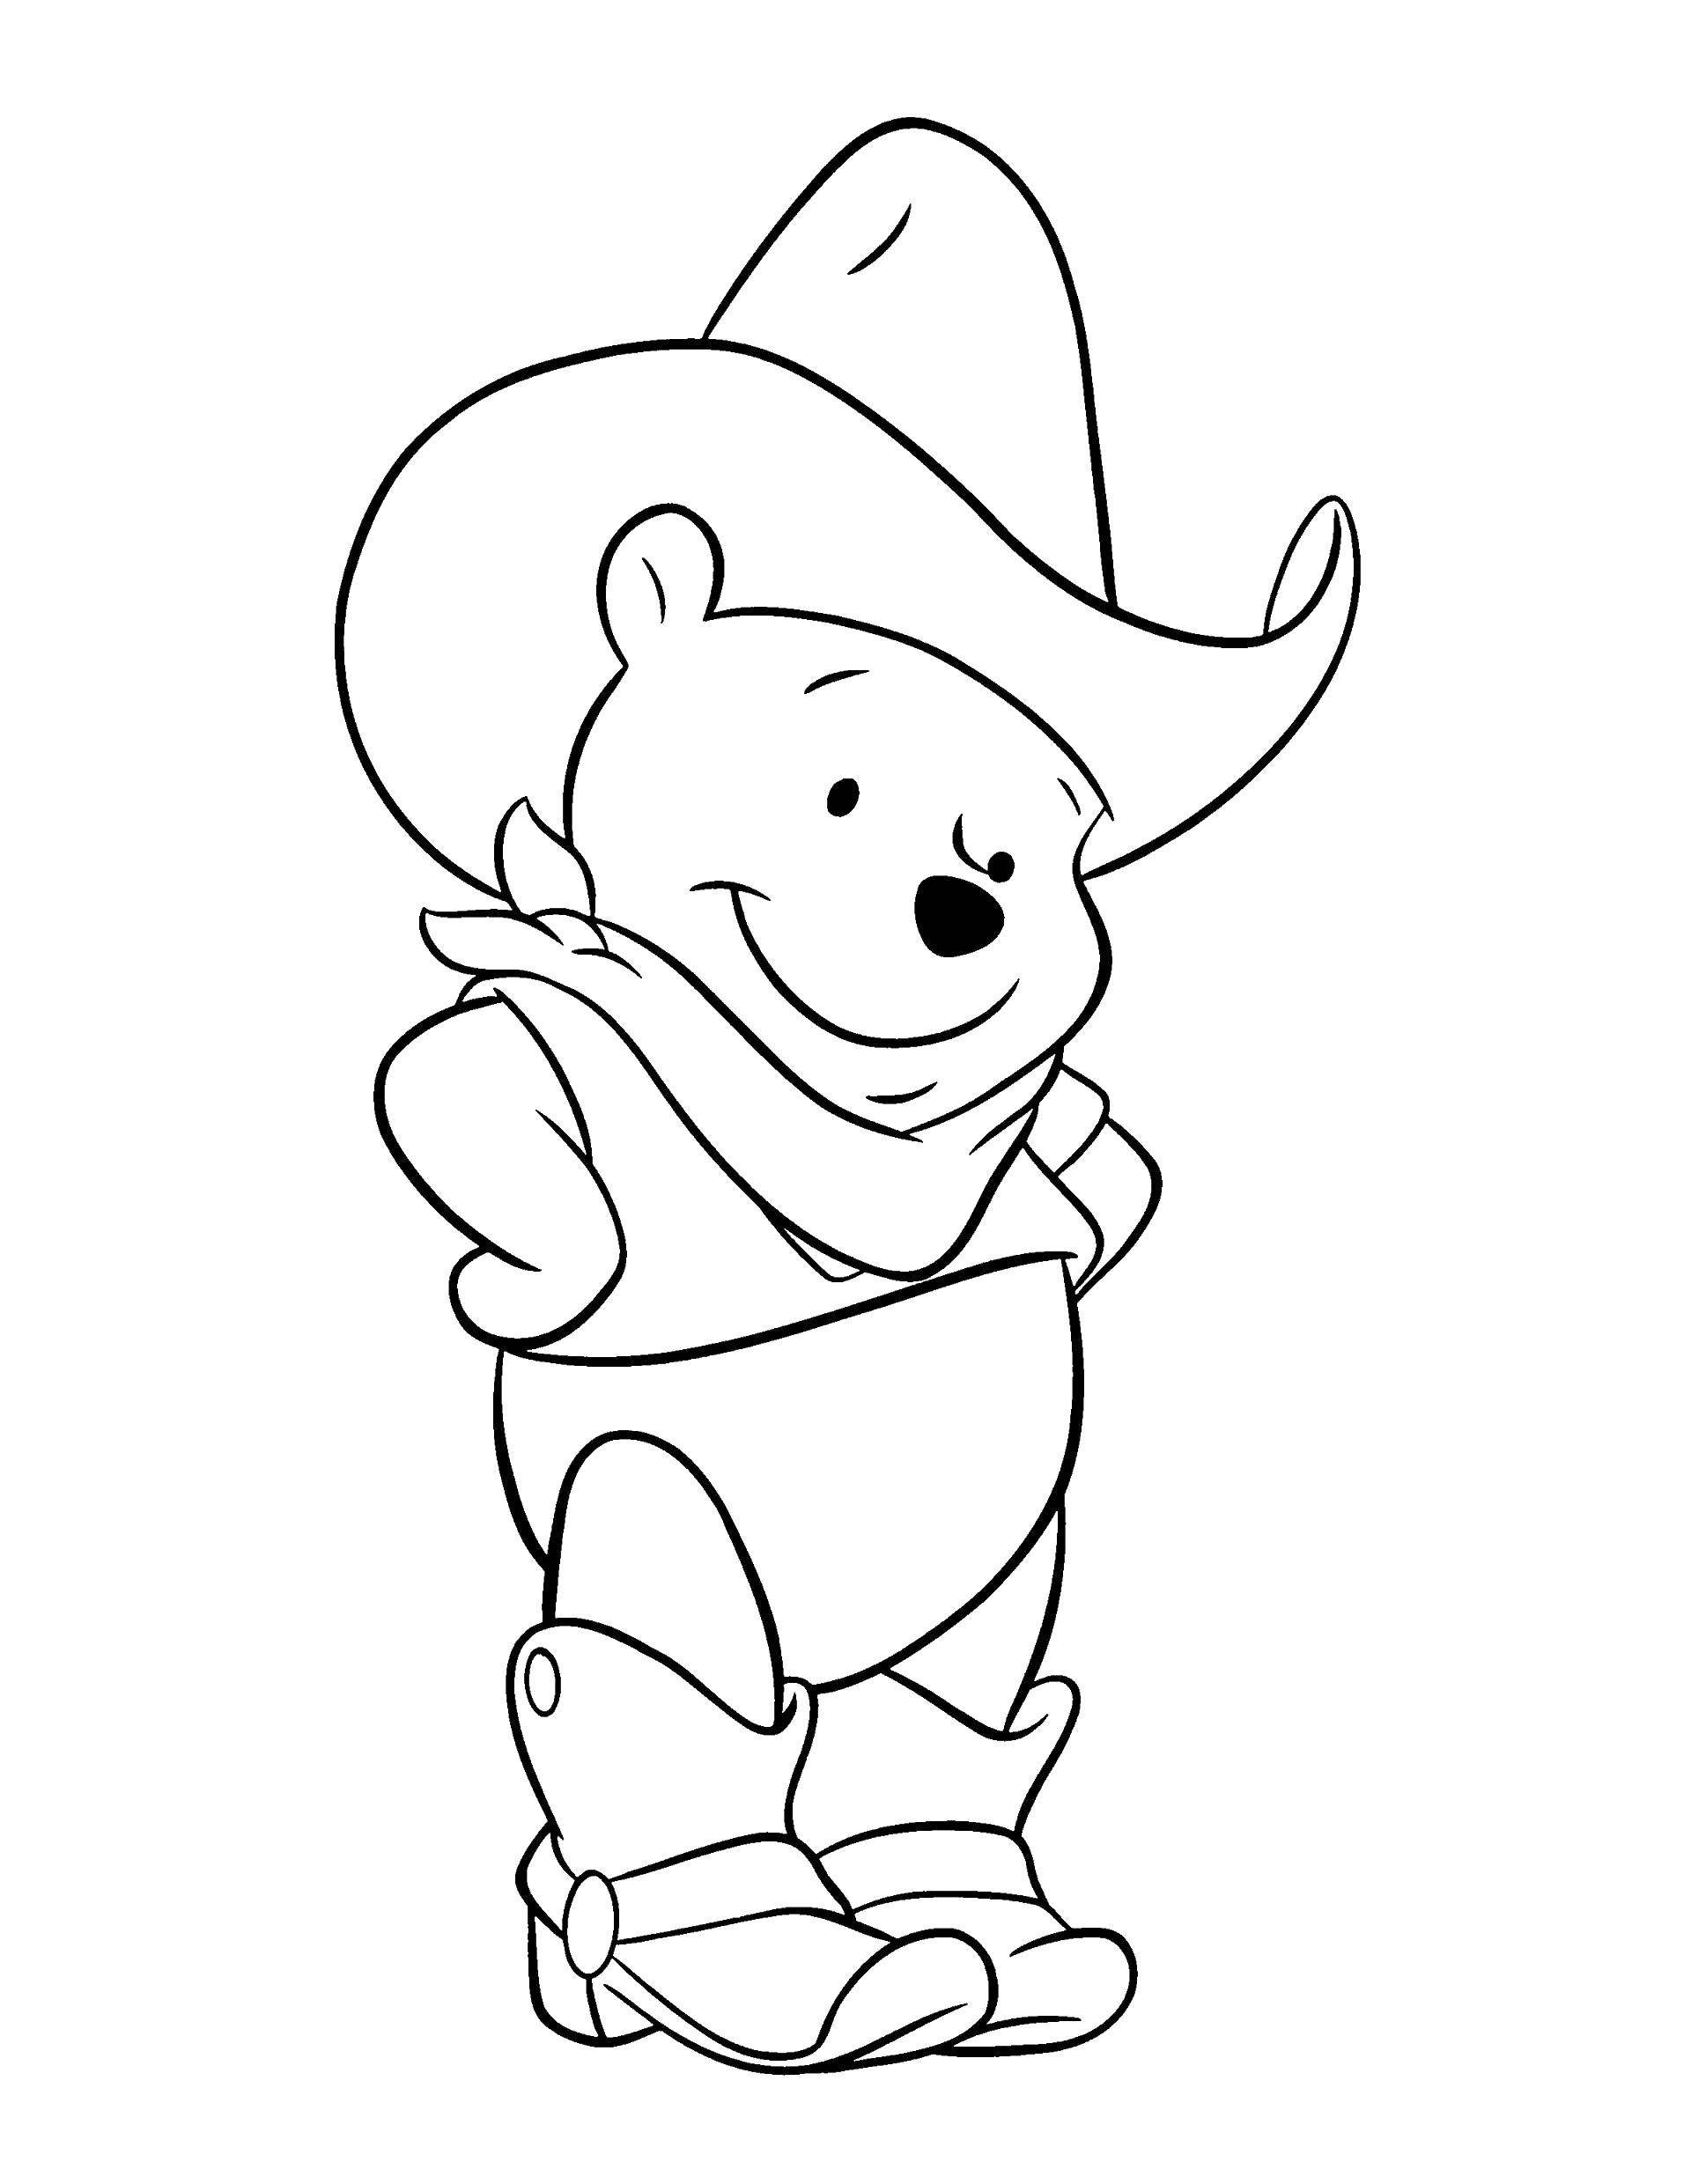 Coloring Winnie the Pooh cowboy. Category cartoons. Tags:  Cartoon character, Winnie the Pooh.